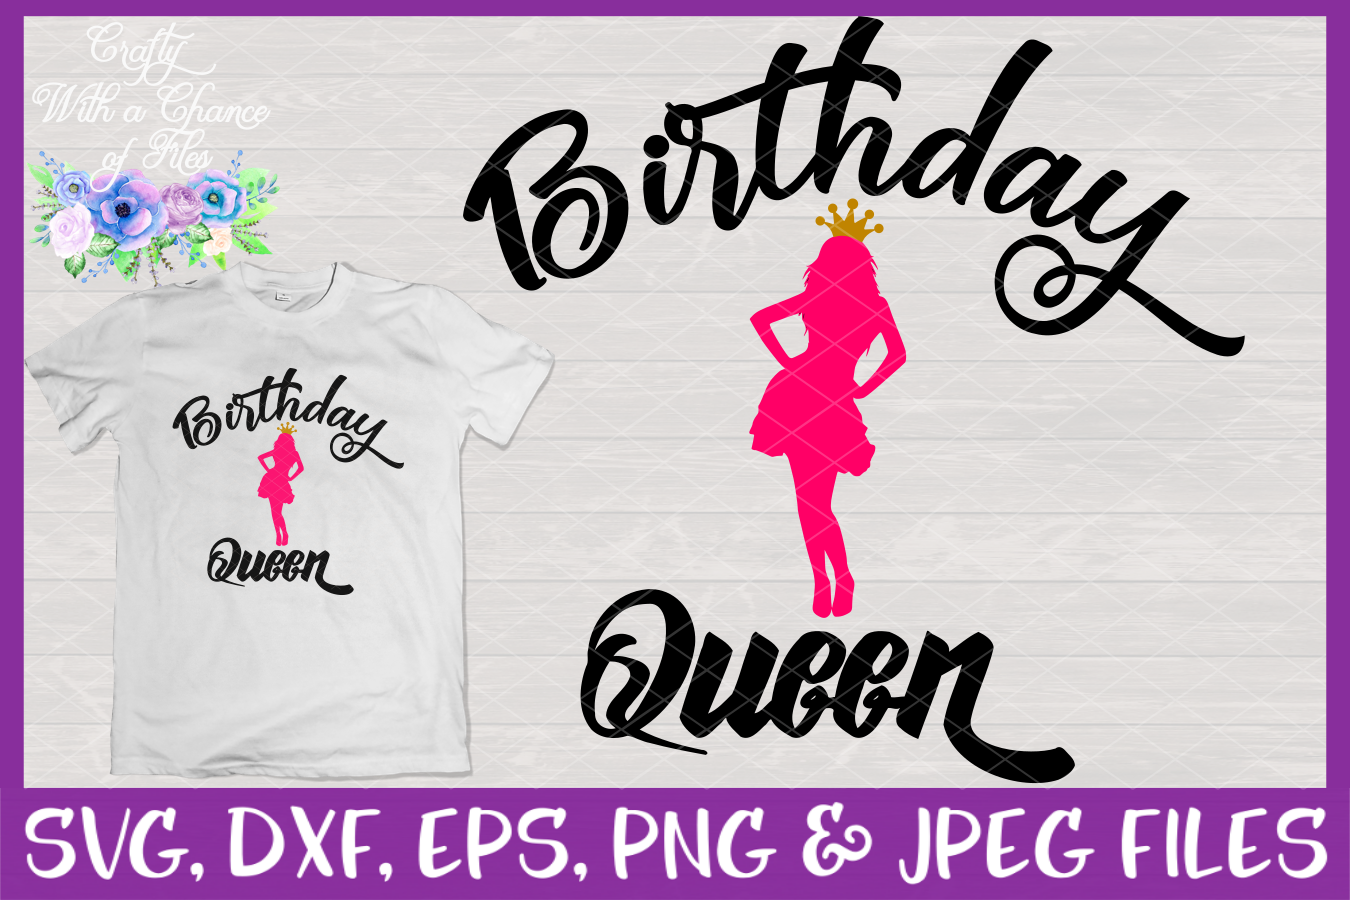 Download Family of the Birthday Queen SVG - Matching Shirt Designs (198727) | SVGs | Design Bundles